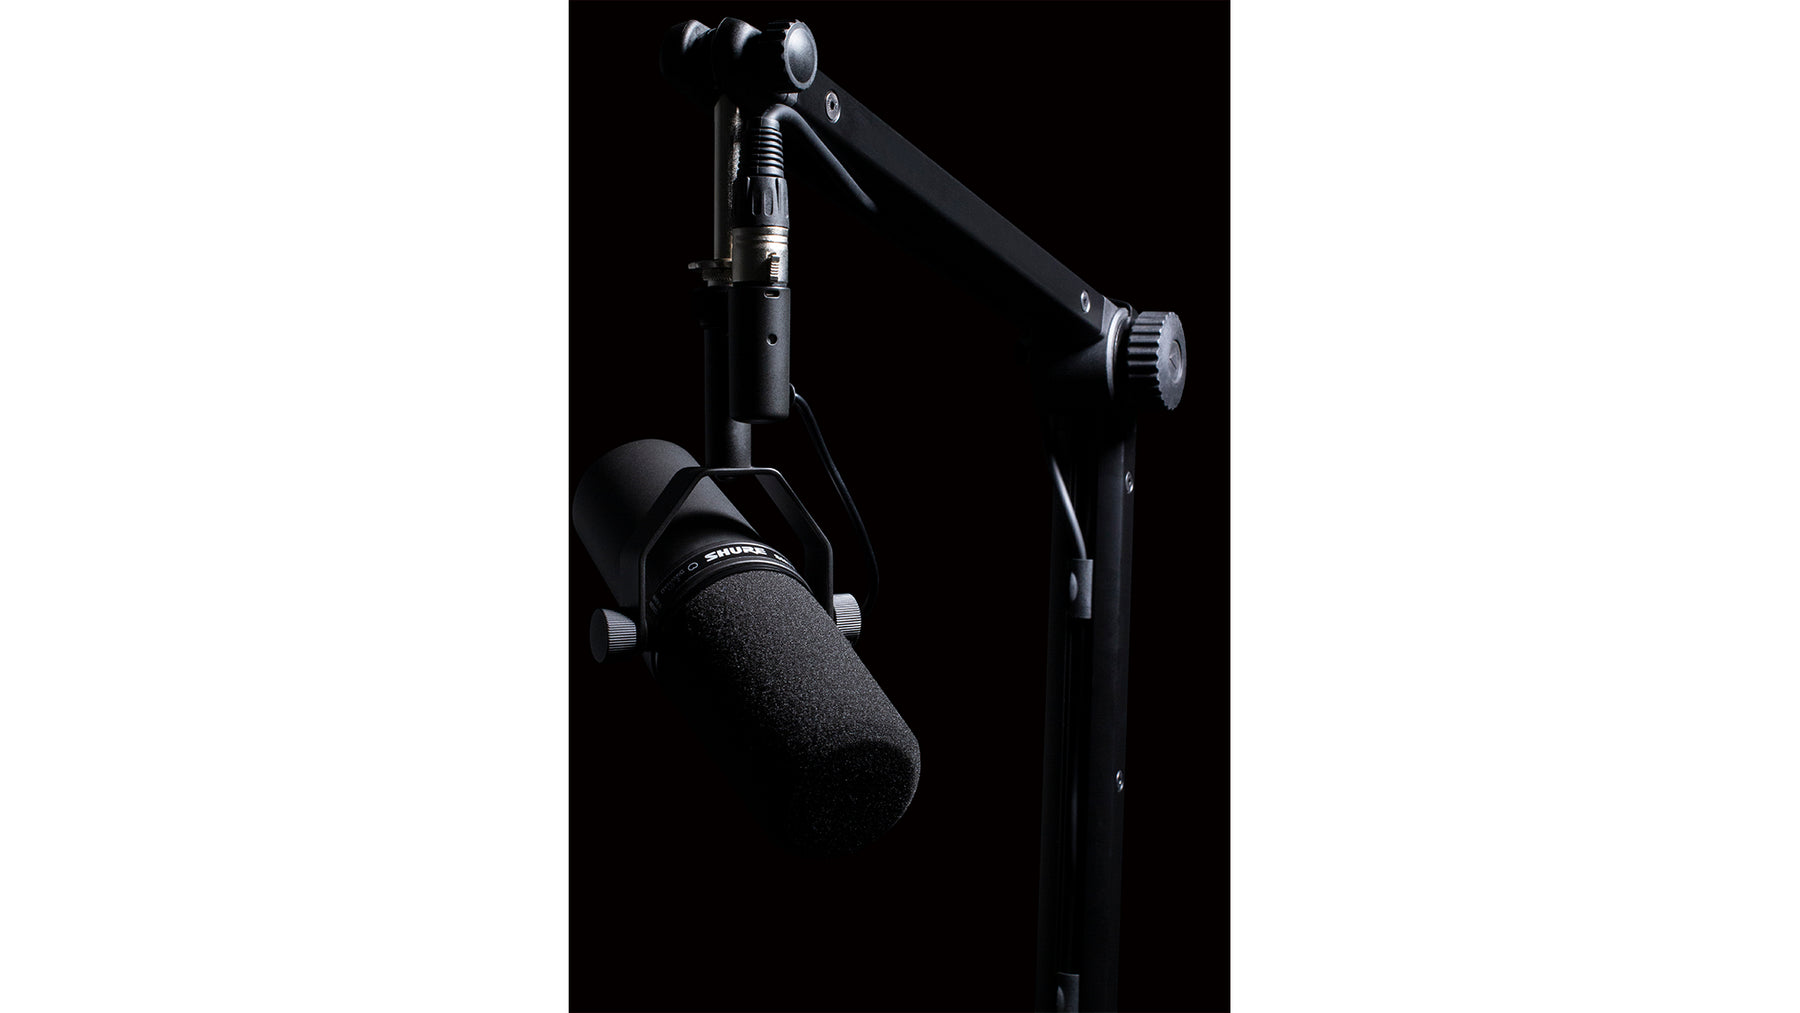 BCM-300 Deluxe Broadcast Mic Stand